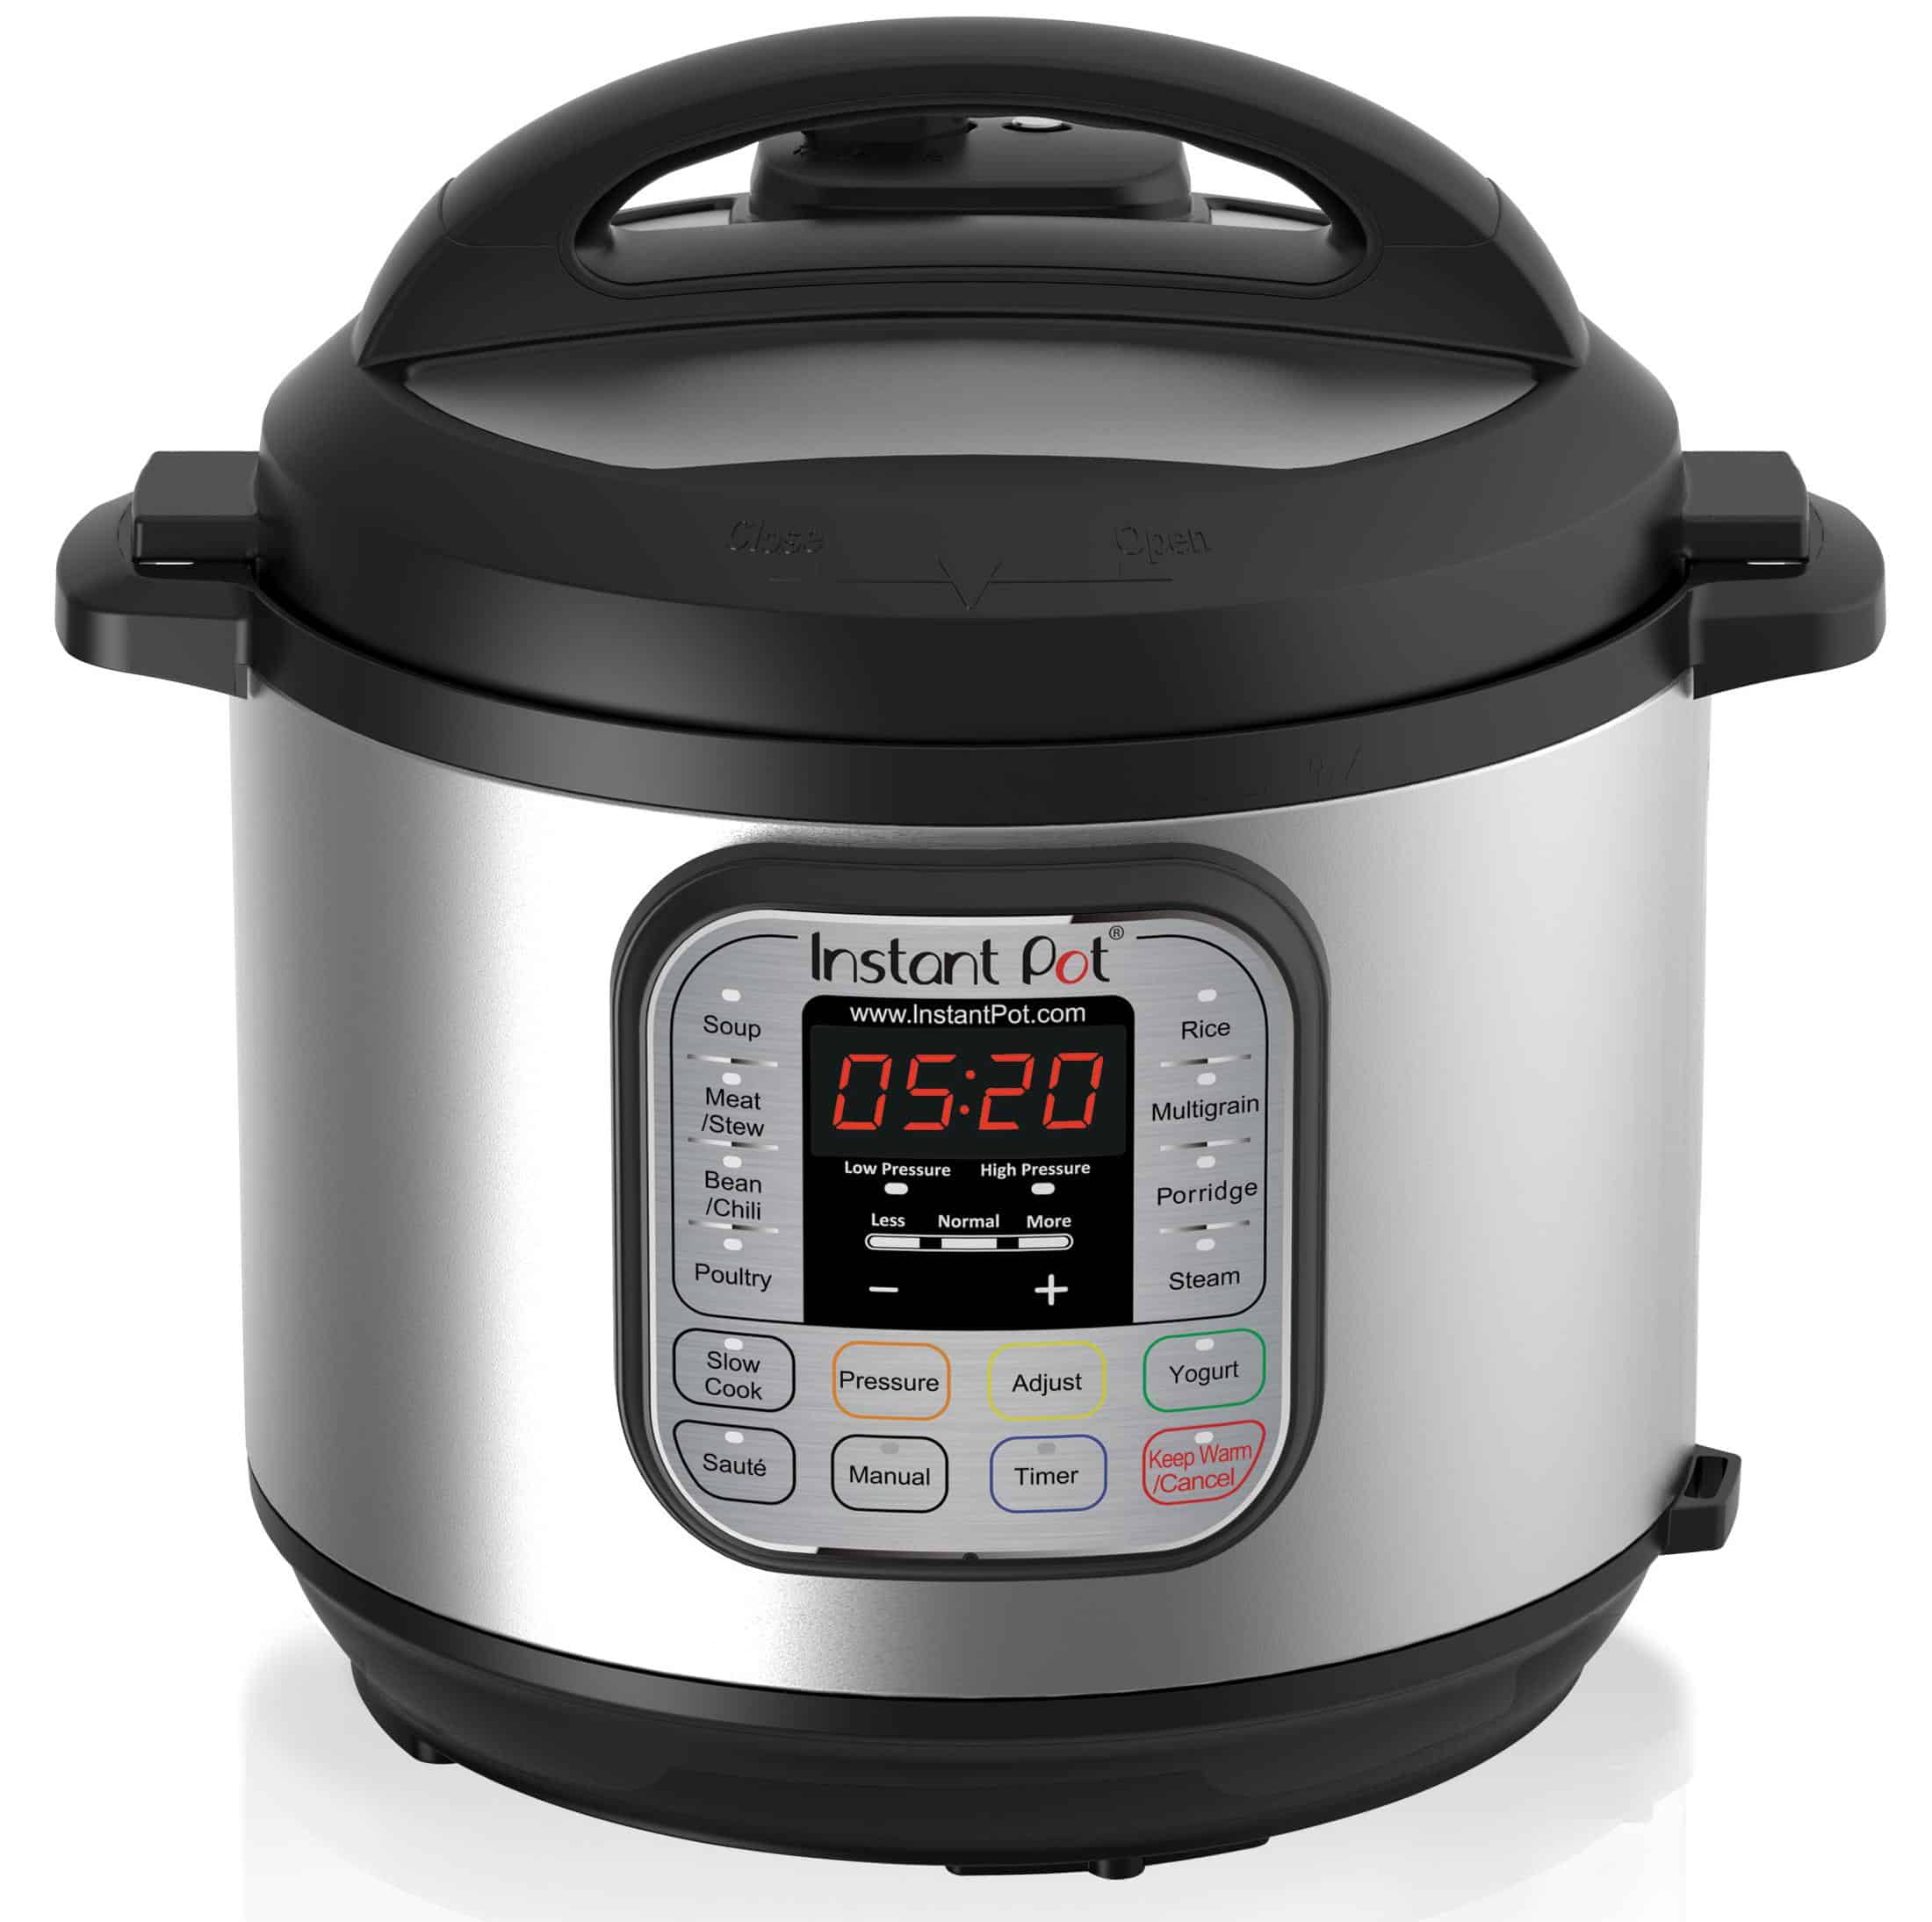 Have you caught on to the Instant Pot pressure cooker craze yet? If you are looking to buy, read my Instant Pot Pressure Cooker review to find out if you really need one.